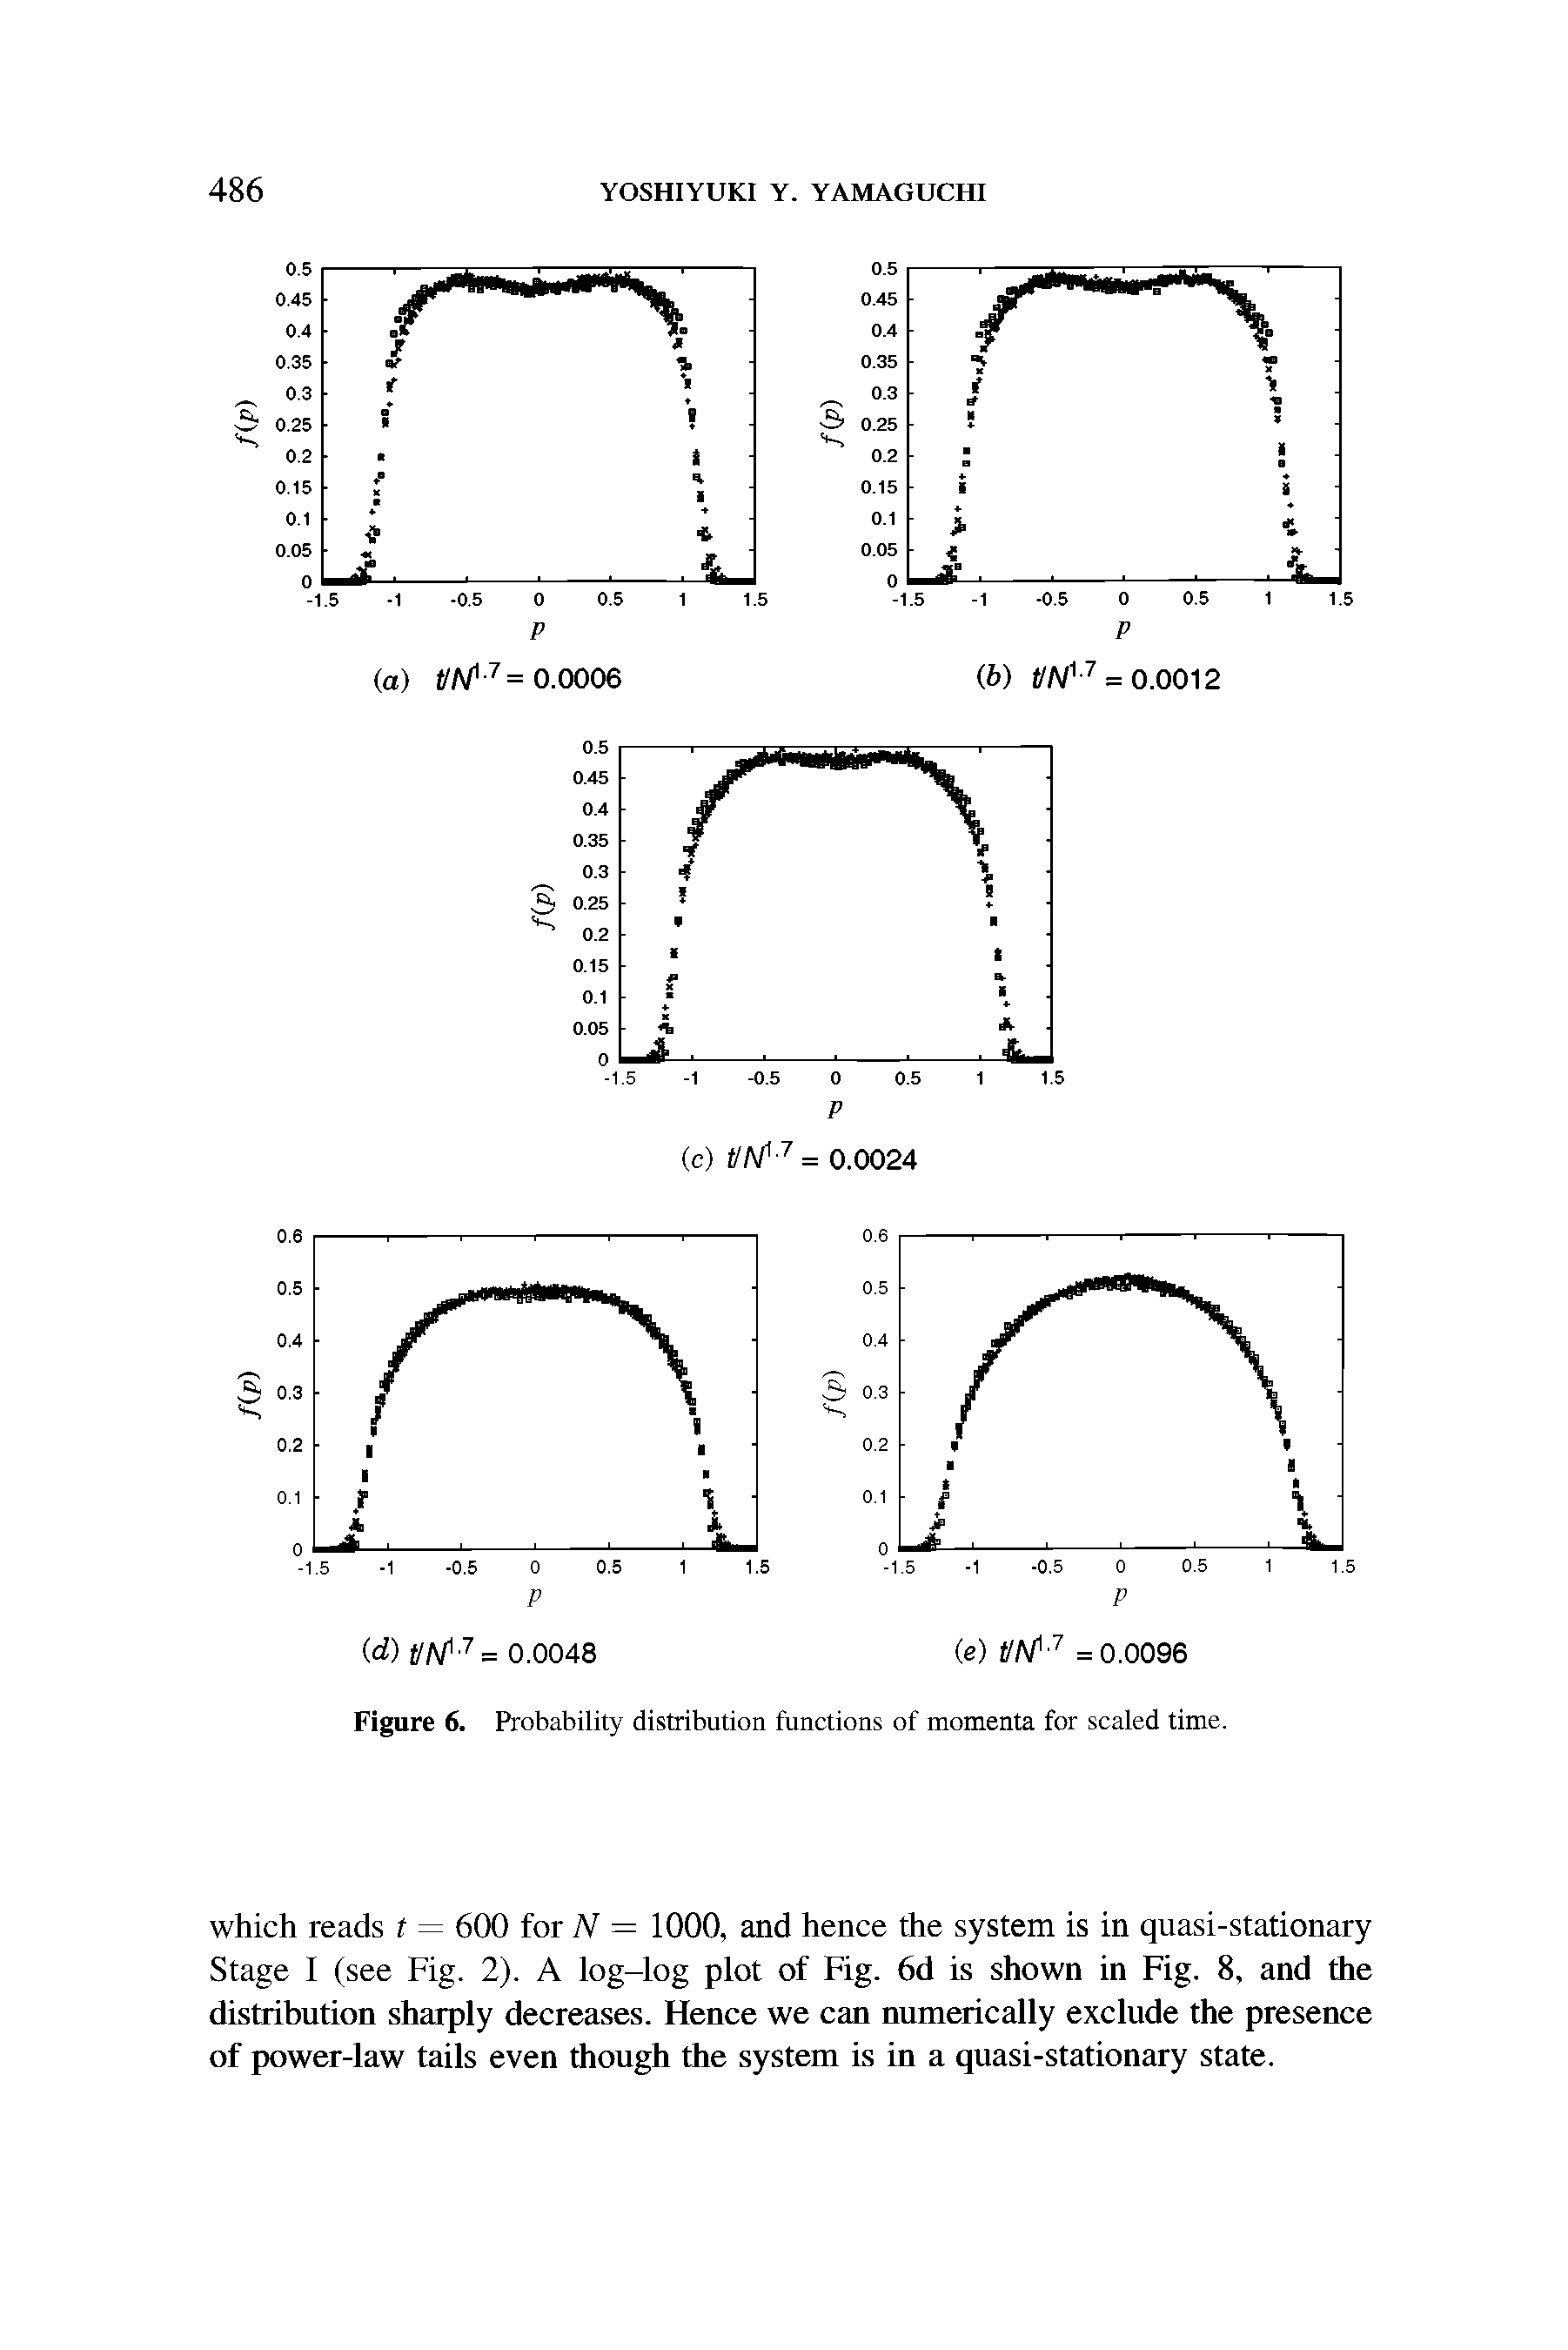 Figure 6. Probability distribution functions of momenta for scaled time.